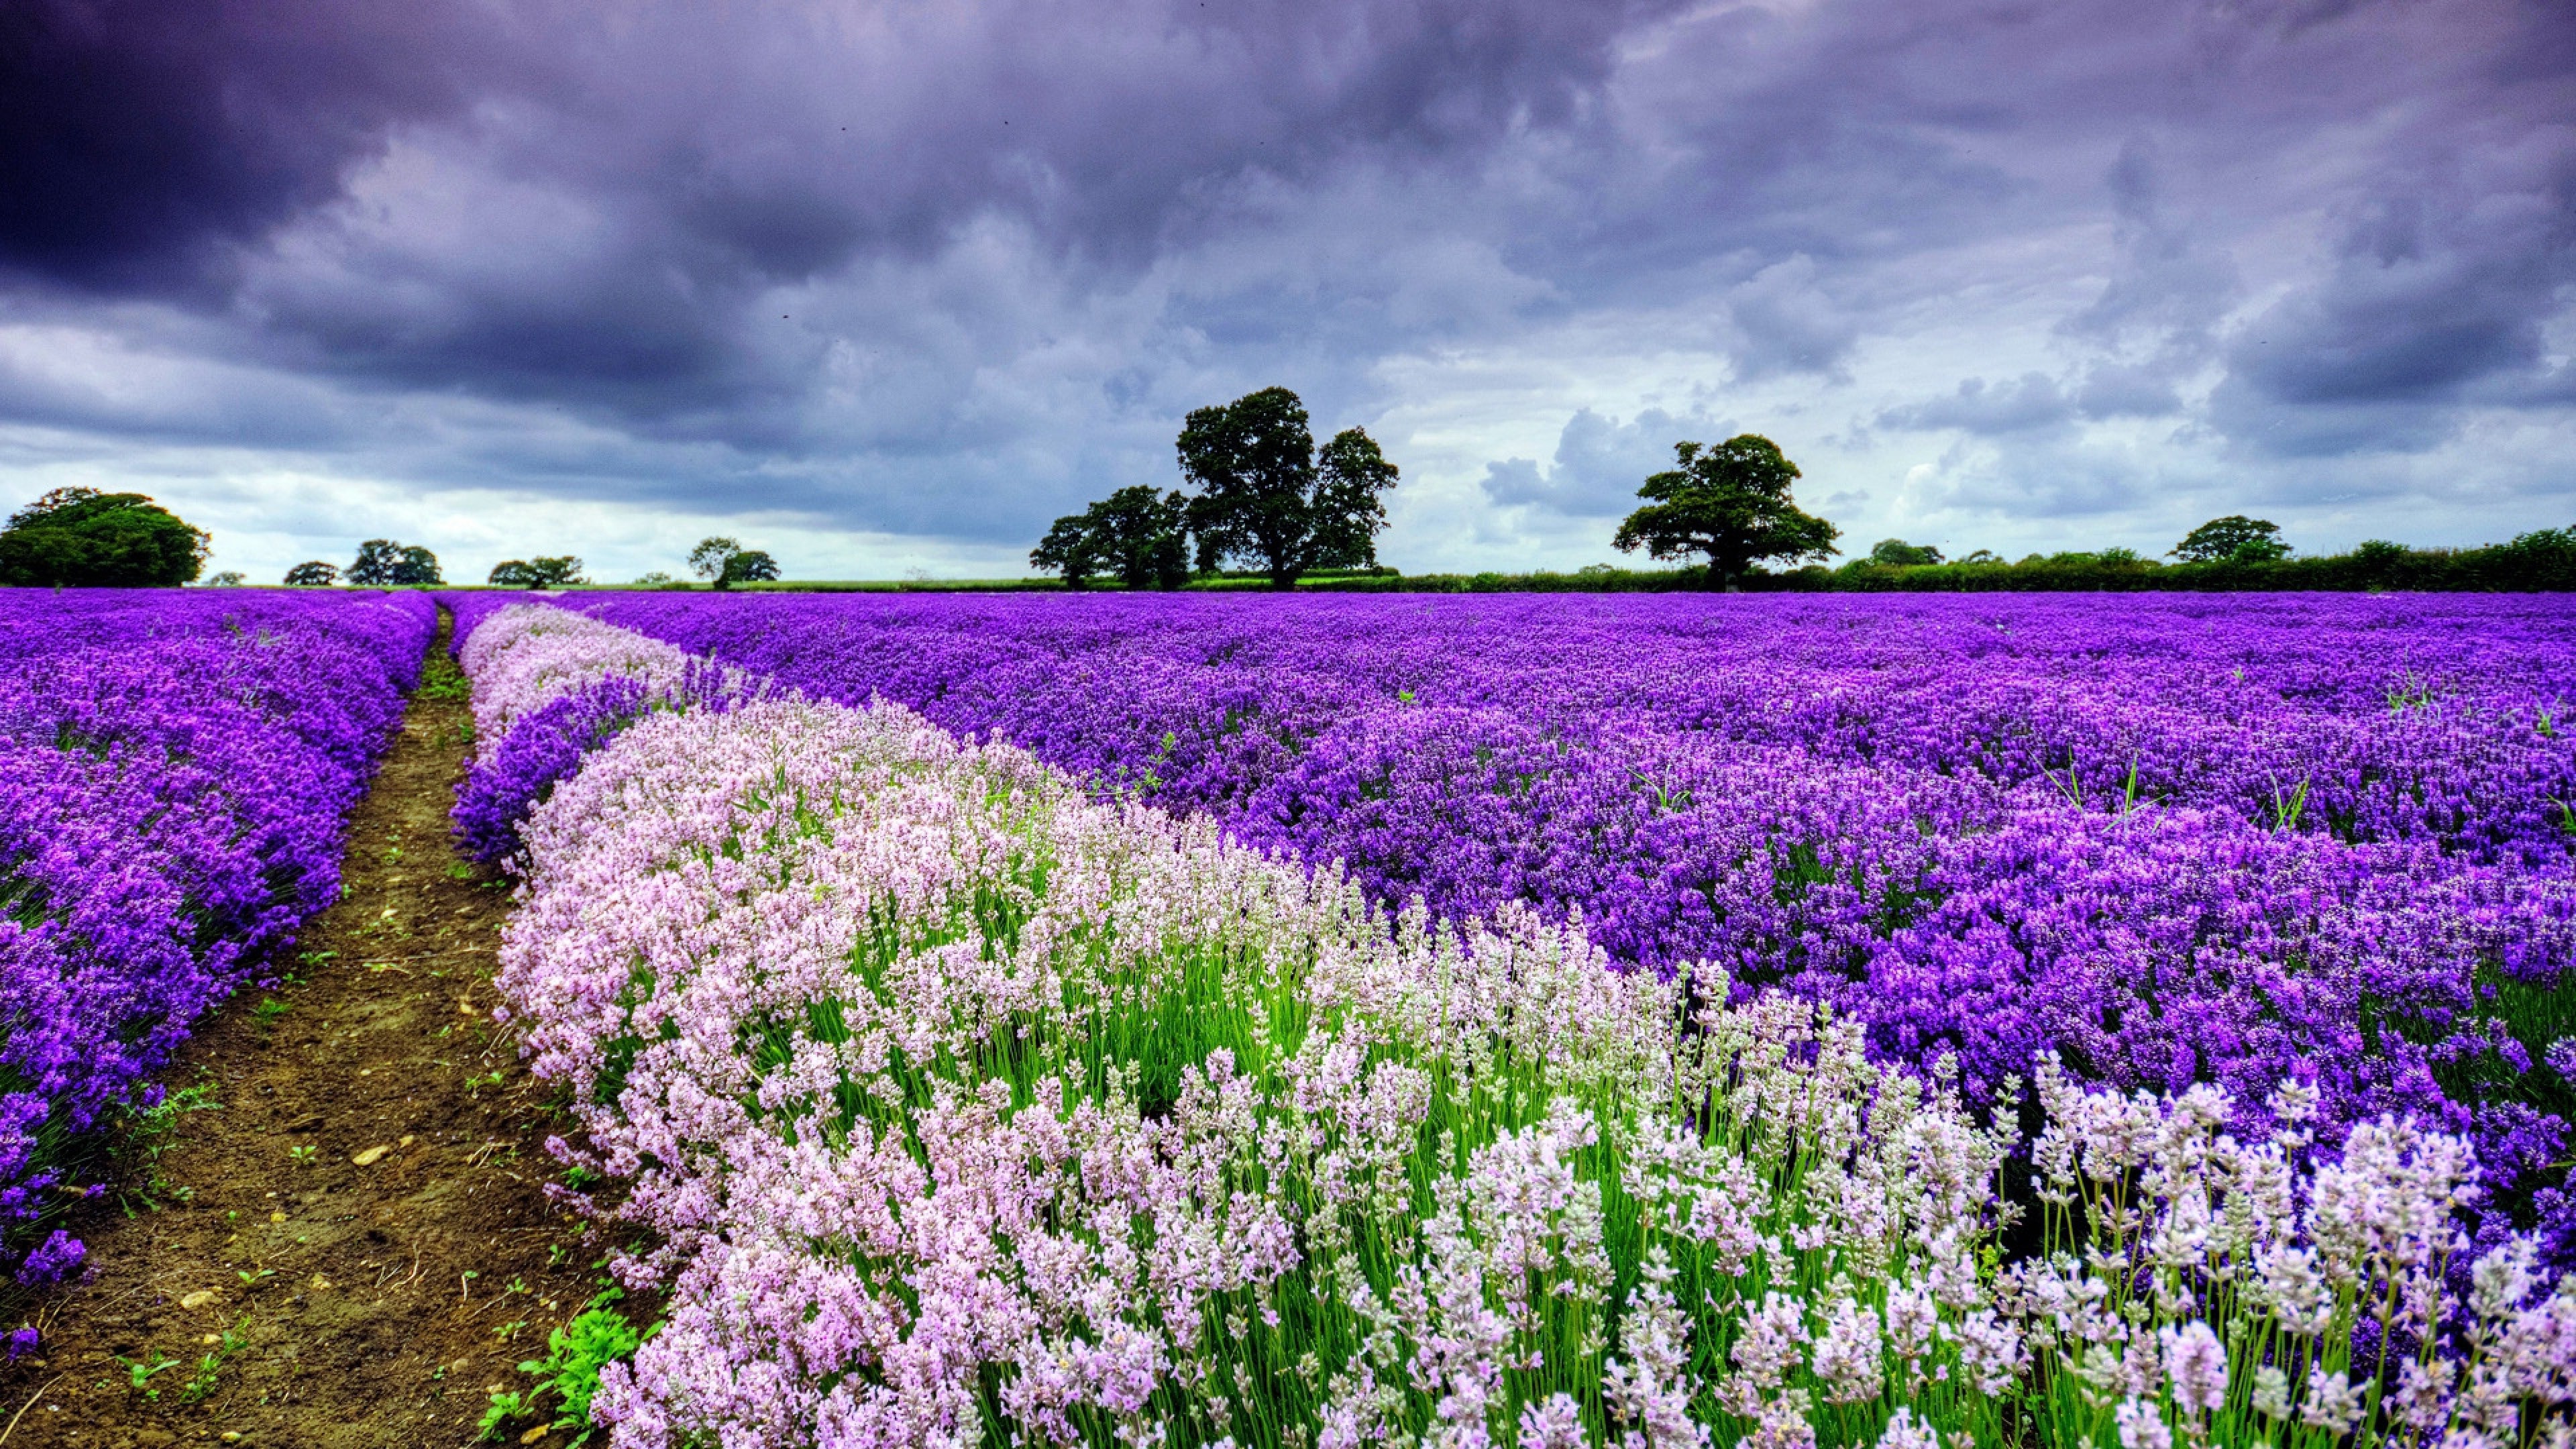 Flower Field: Provence, The purple rows of lavender that pepper the landscape every summer. 3840x2160 4K Wallpaper.